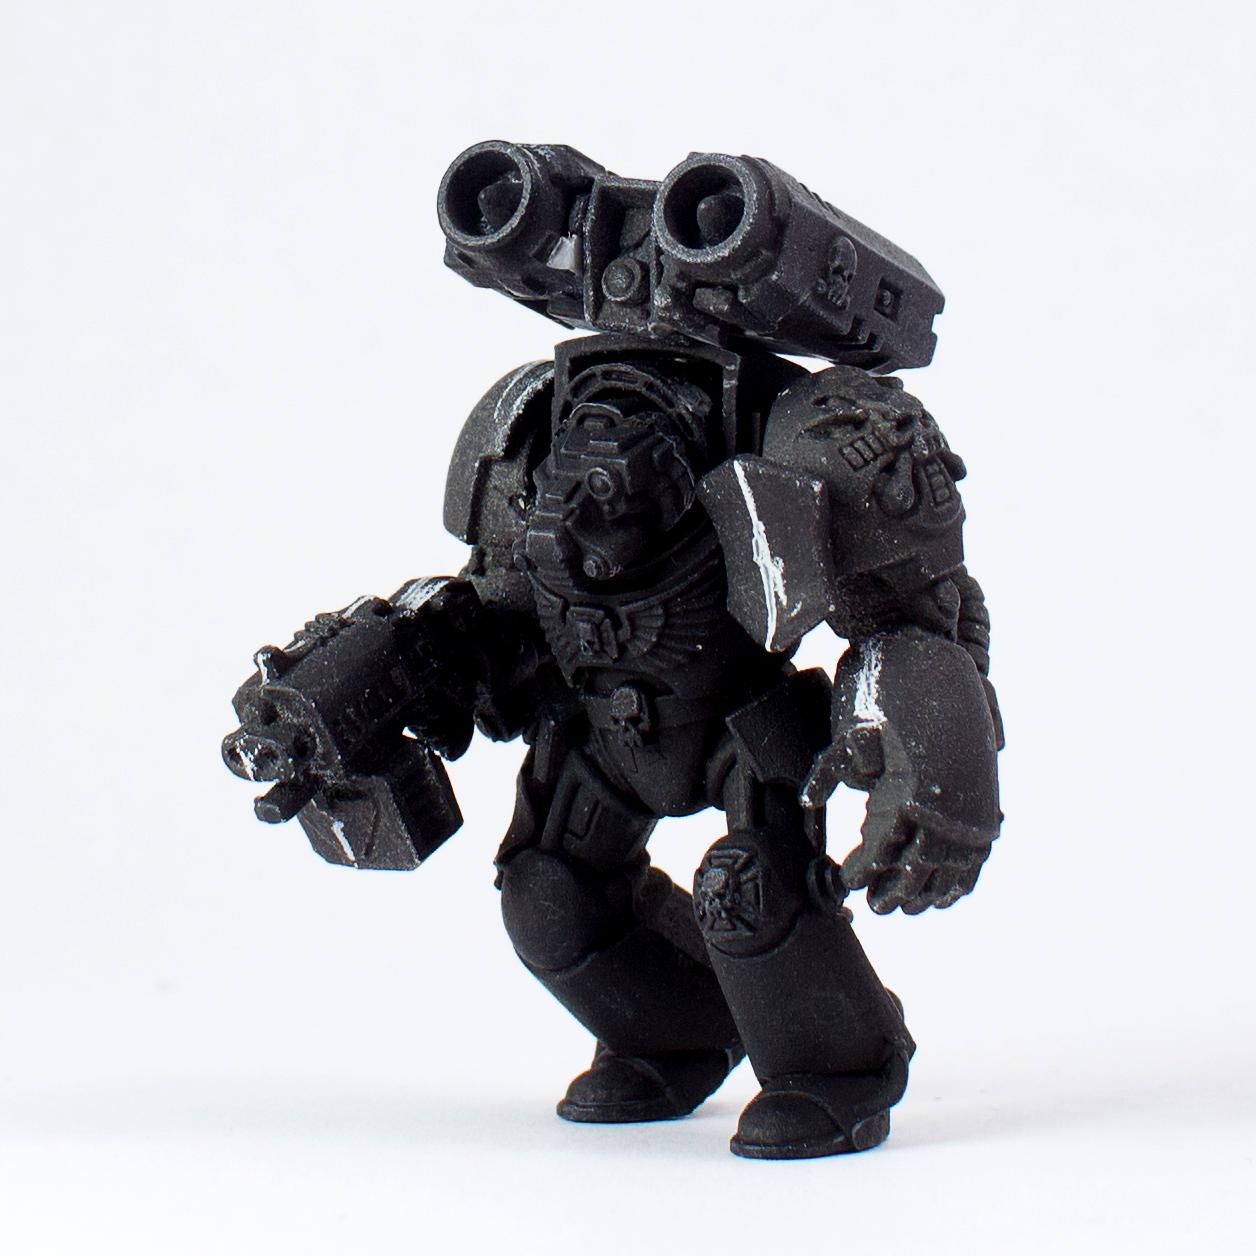 Conversion, Cyclone, Missile, Power Fist, Storm Bolter, Terminator Armor